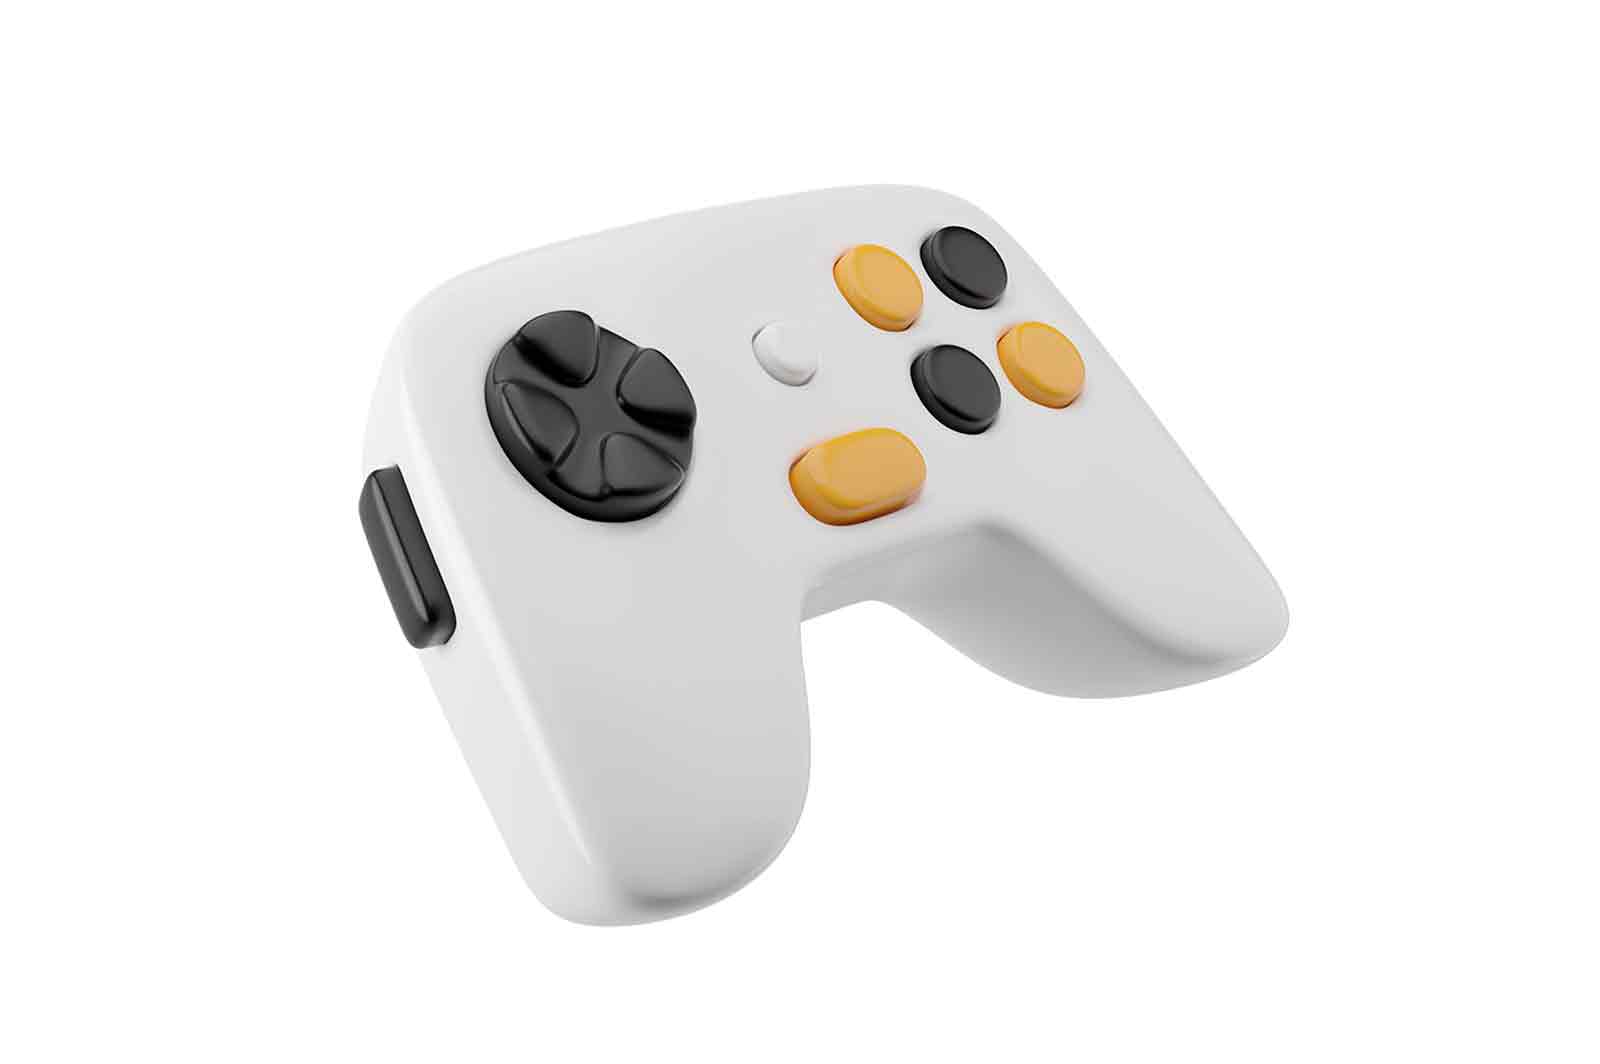 Gaming controller, 3d rendered illustration, with black and yellow buttons and white body. Isolated on white background, realistic look.